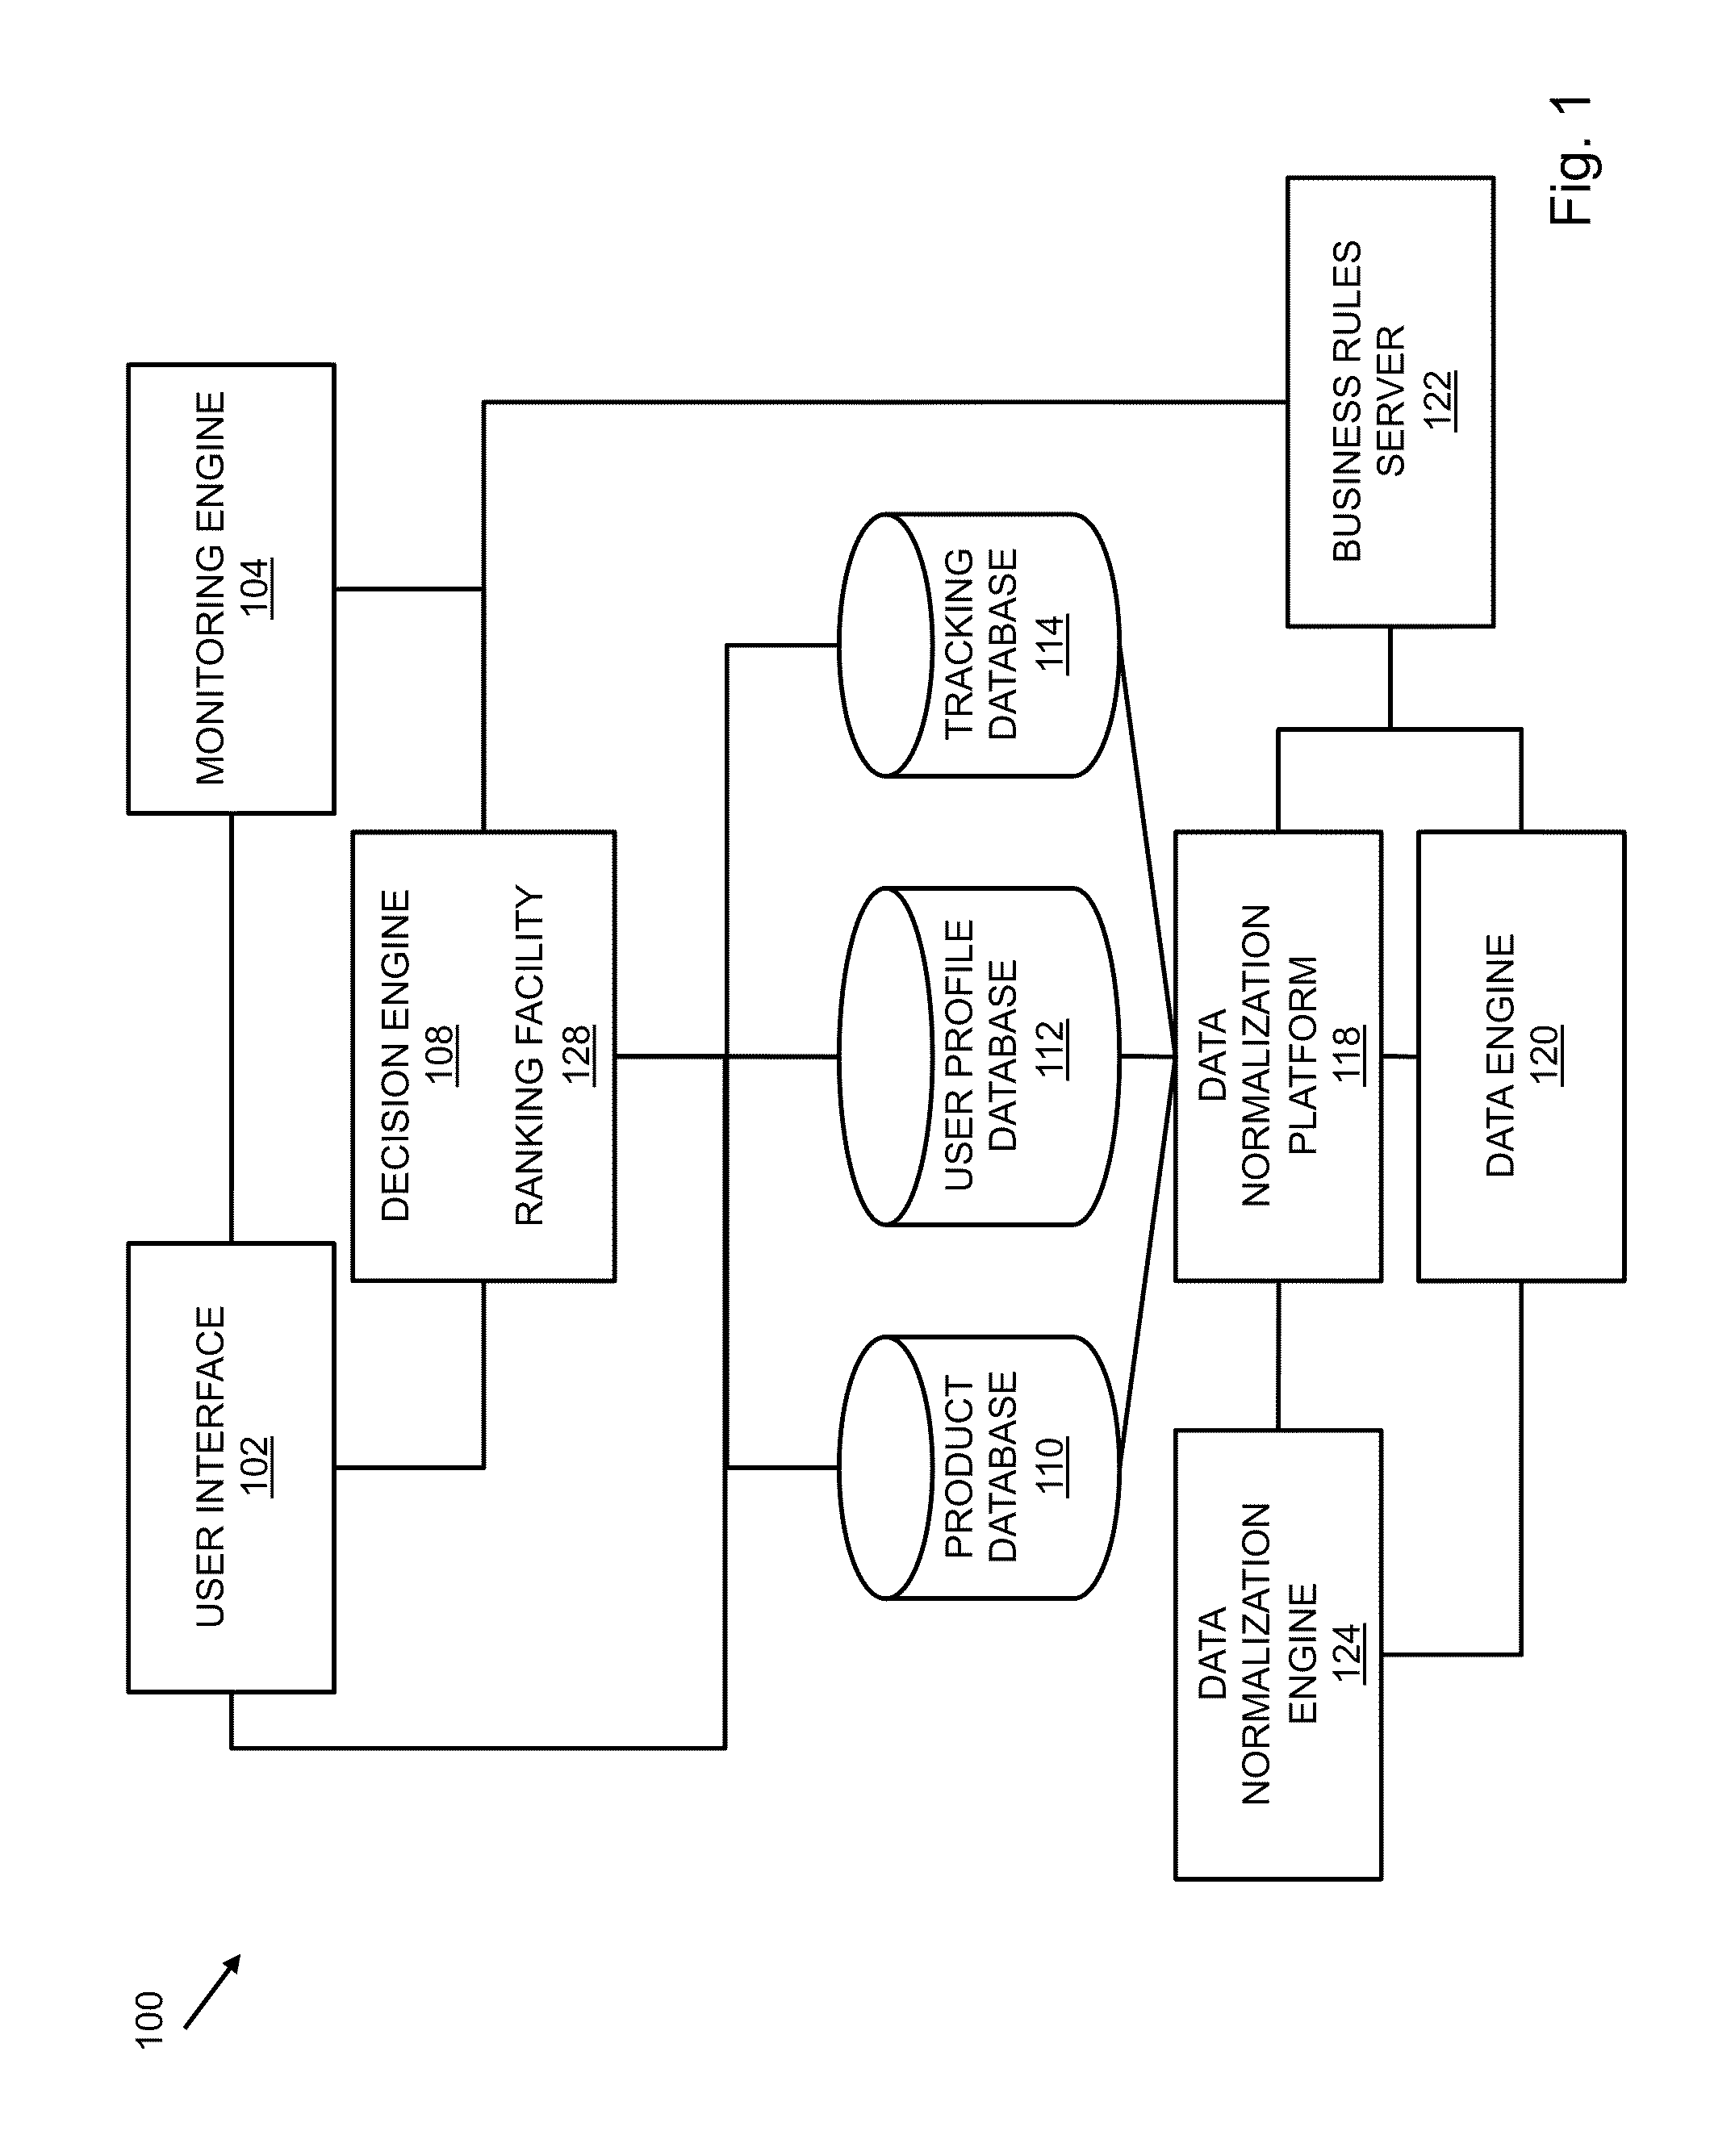 System and method for matching a savings opportunity using census data